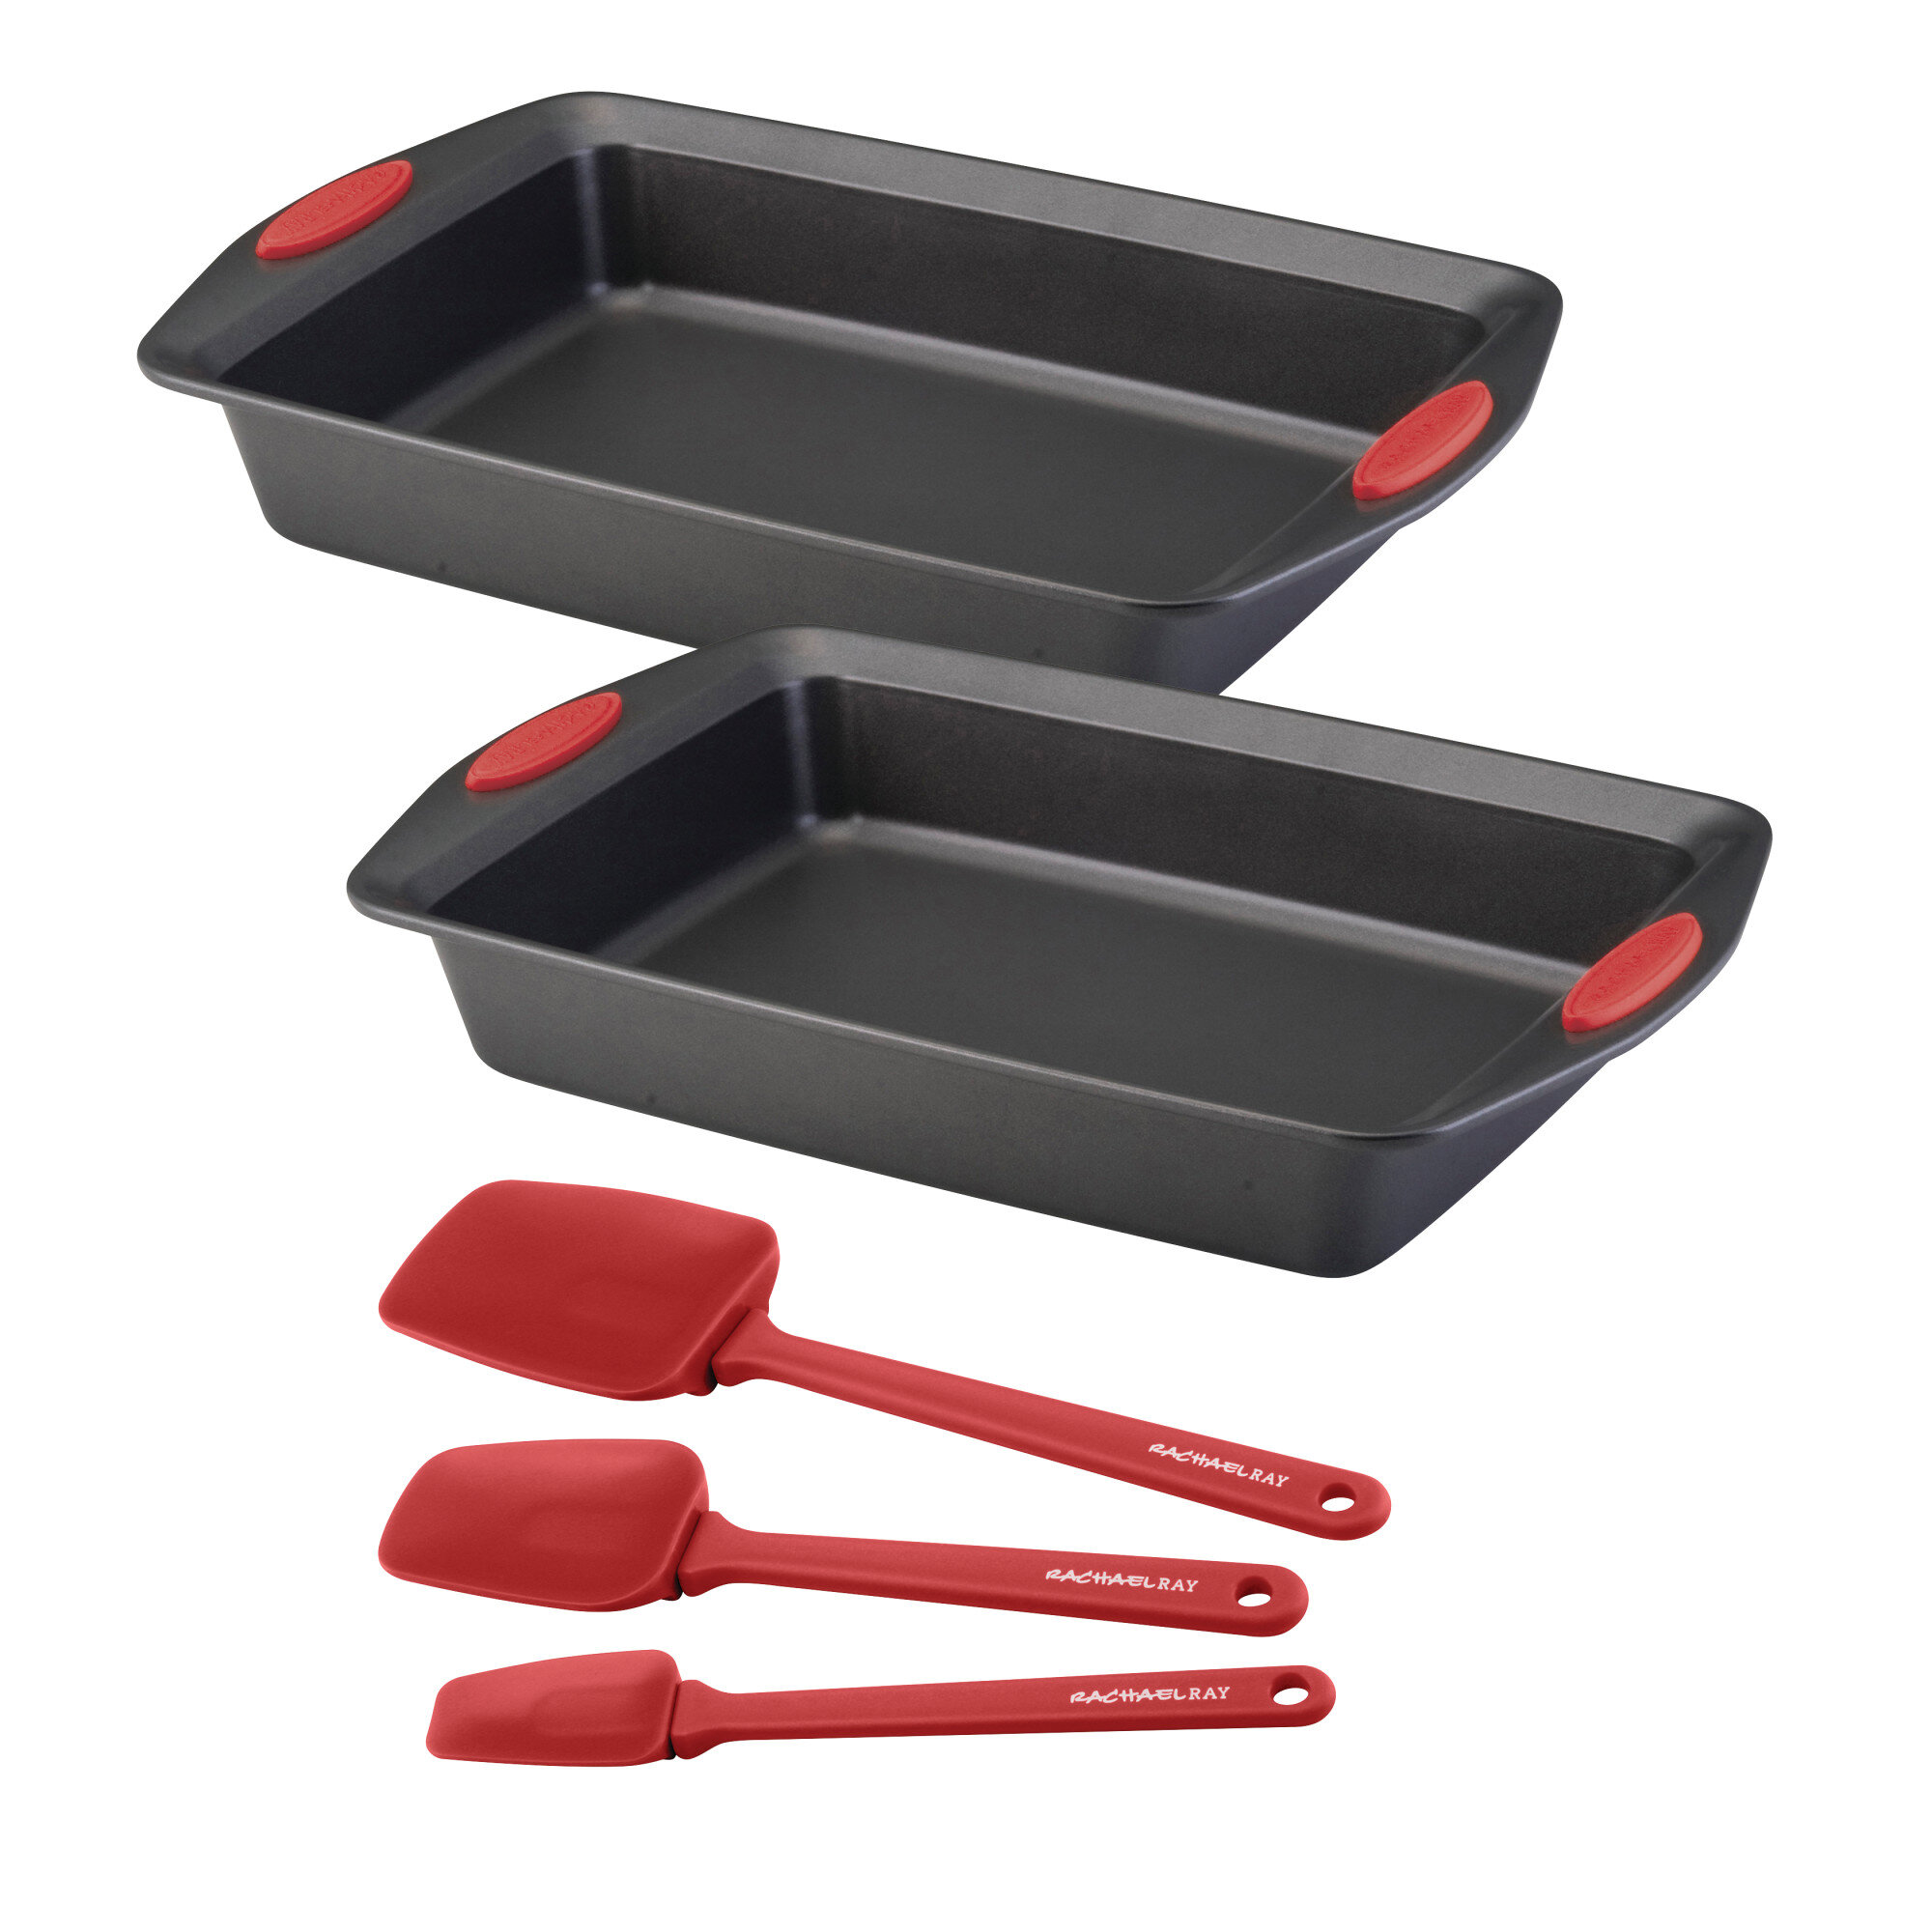 Rachael Ray Cucina Nonstick Bakeware Baking Pans Set, 10 Piece, Latte Brown  and Cranberry Red & Reviews